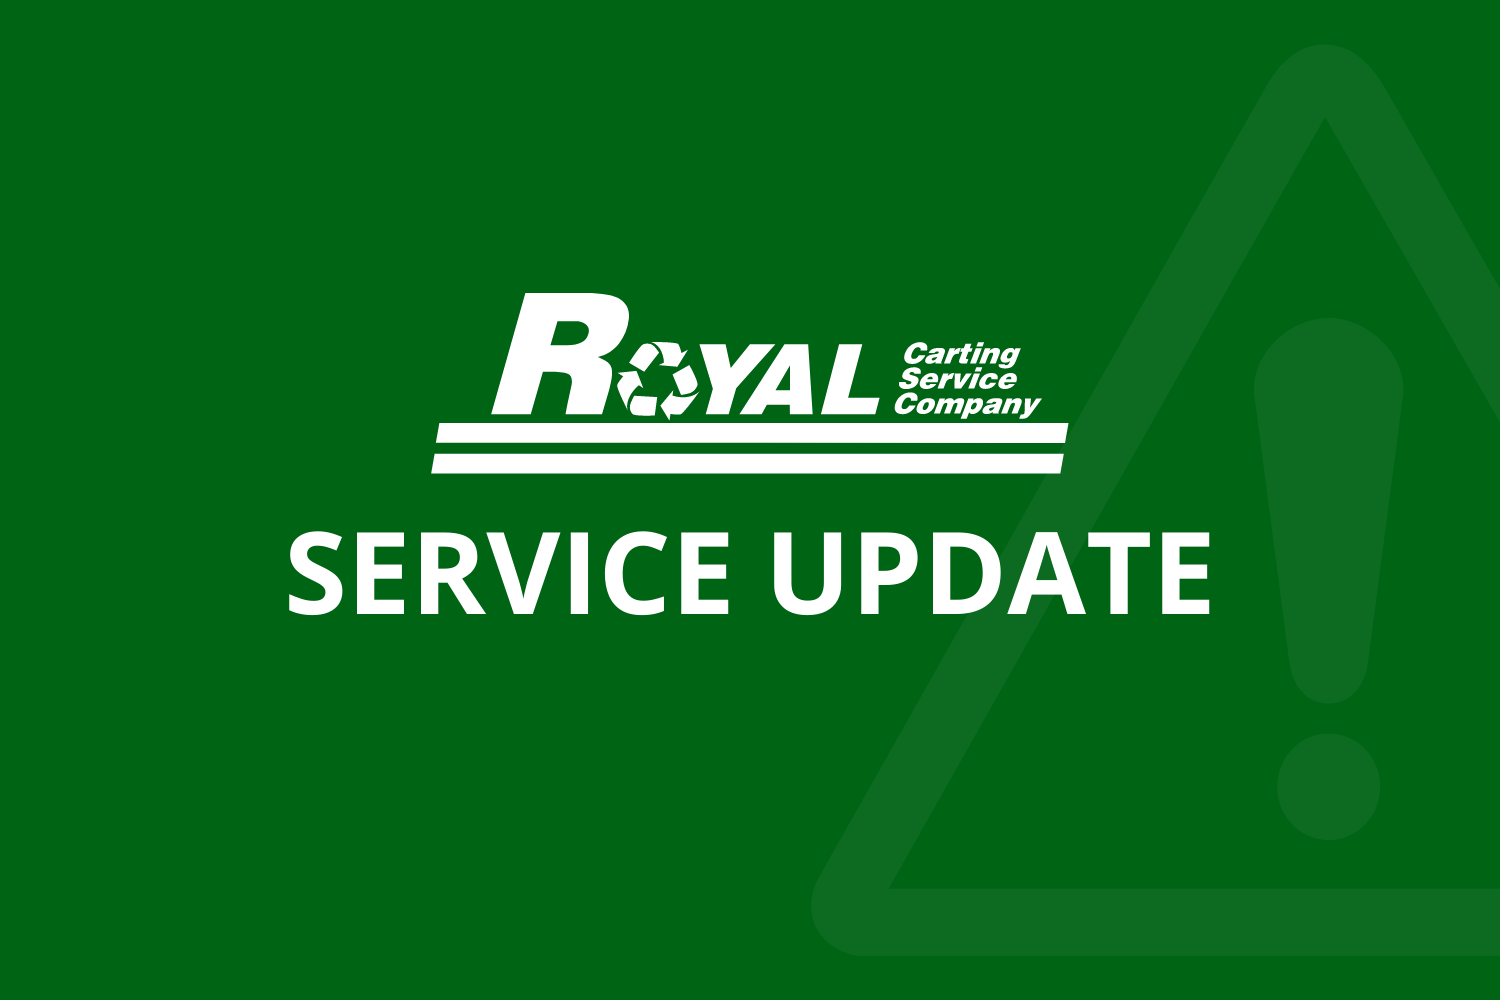 Royal Carting Service Update graphic